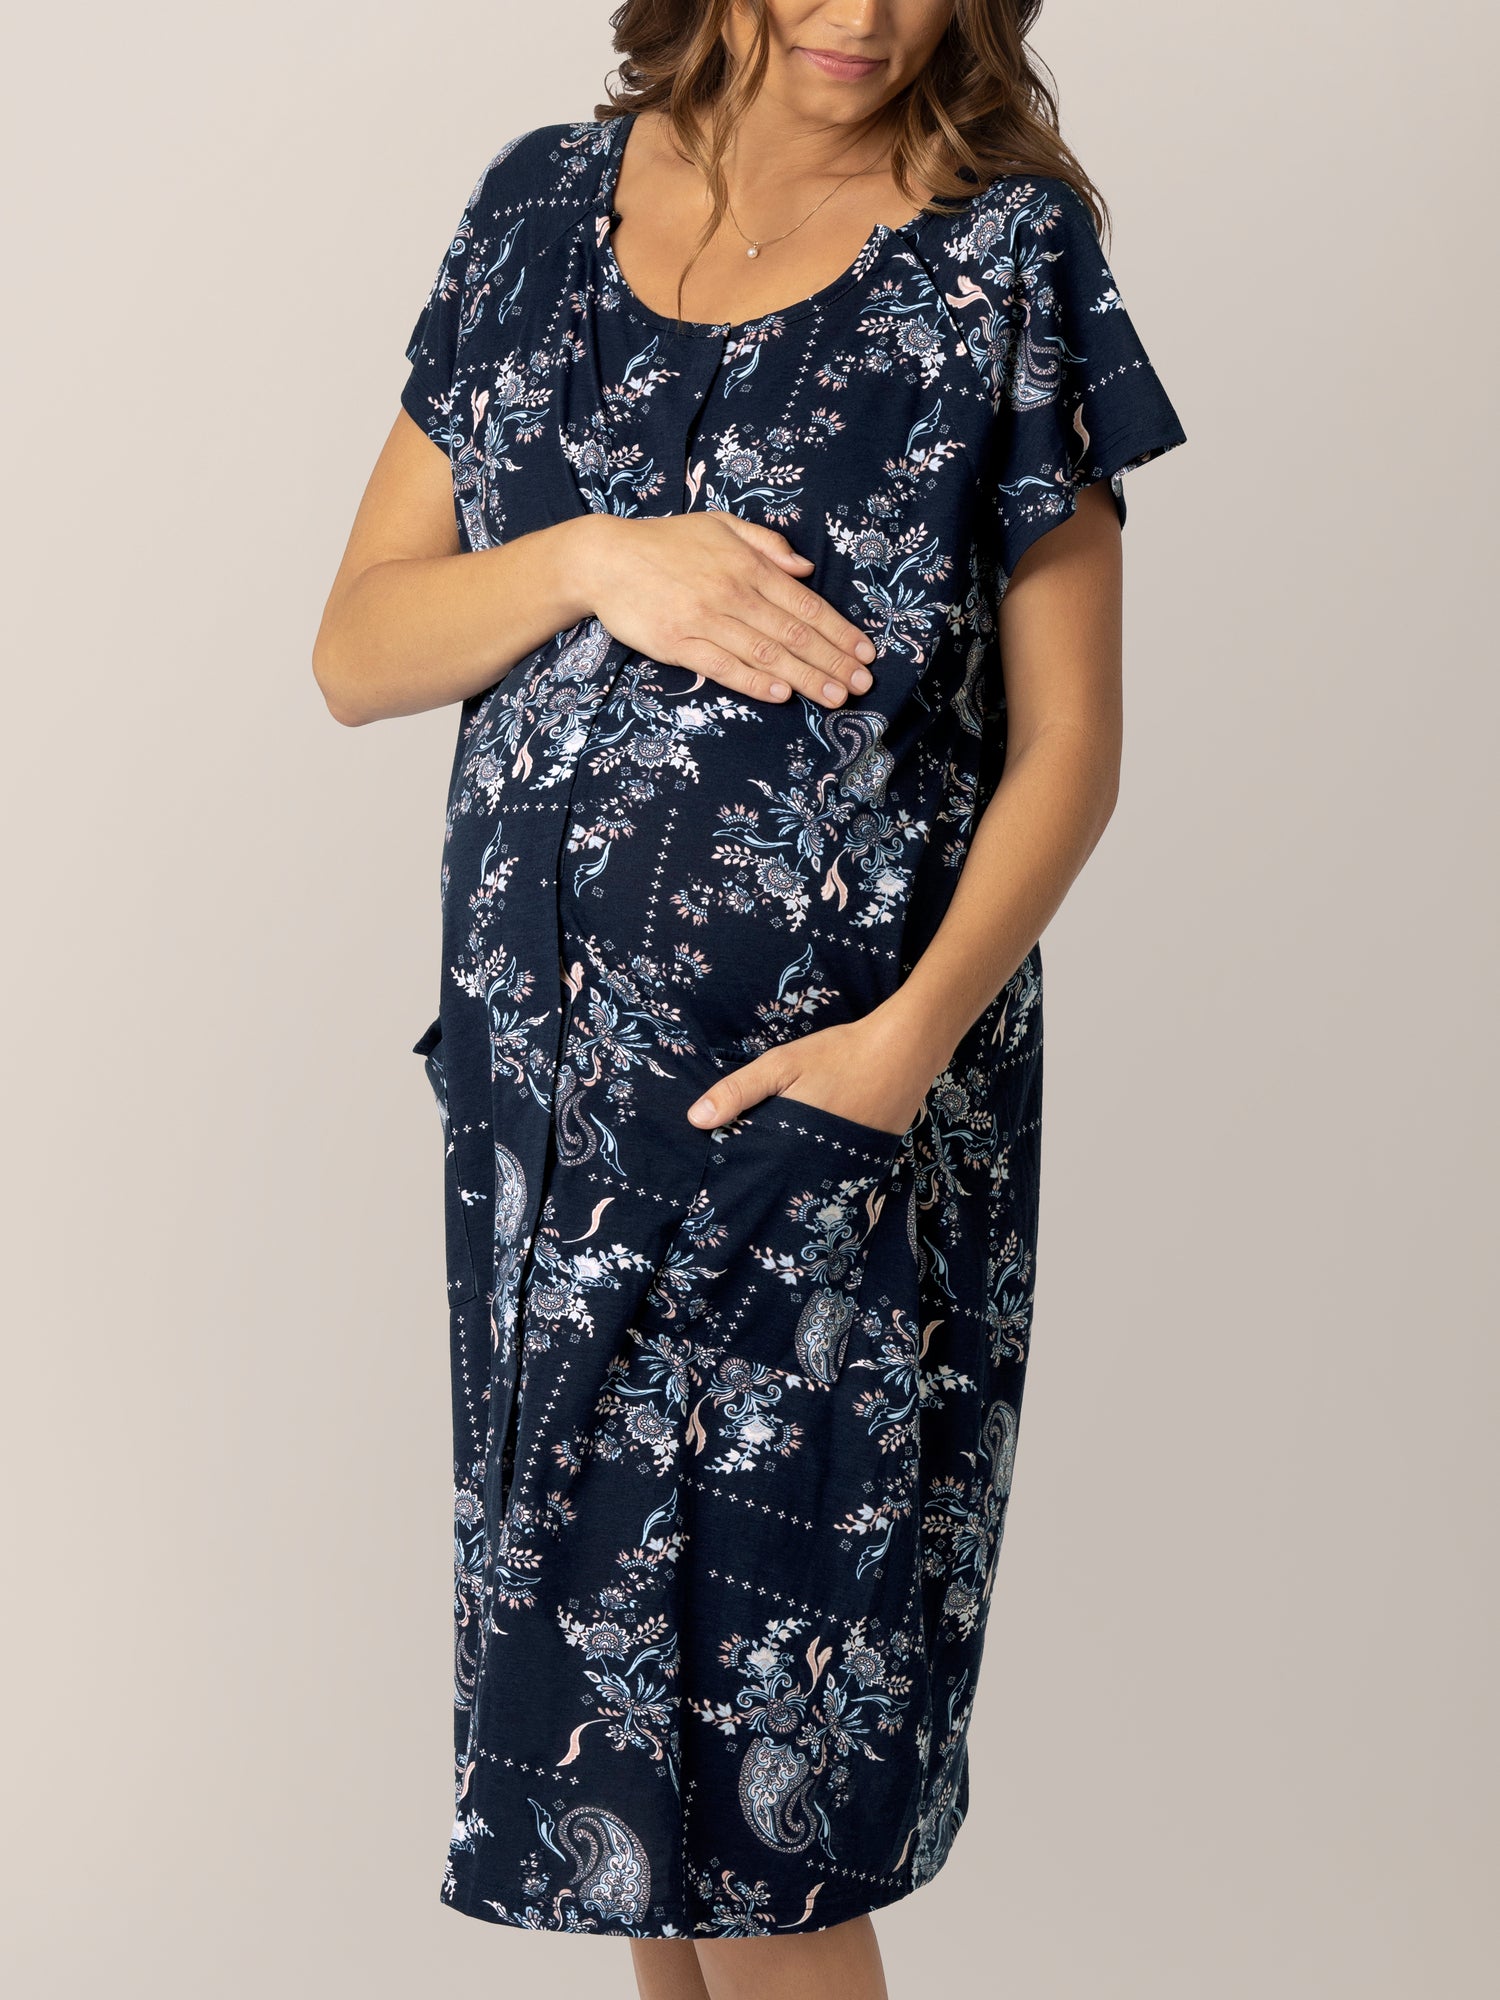 Cropped in front view of pregnant model wearing the Universal Labor & Delivery Gown in Navy Paisley, with one hand in pocket..